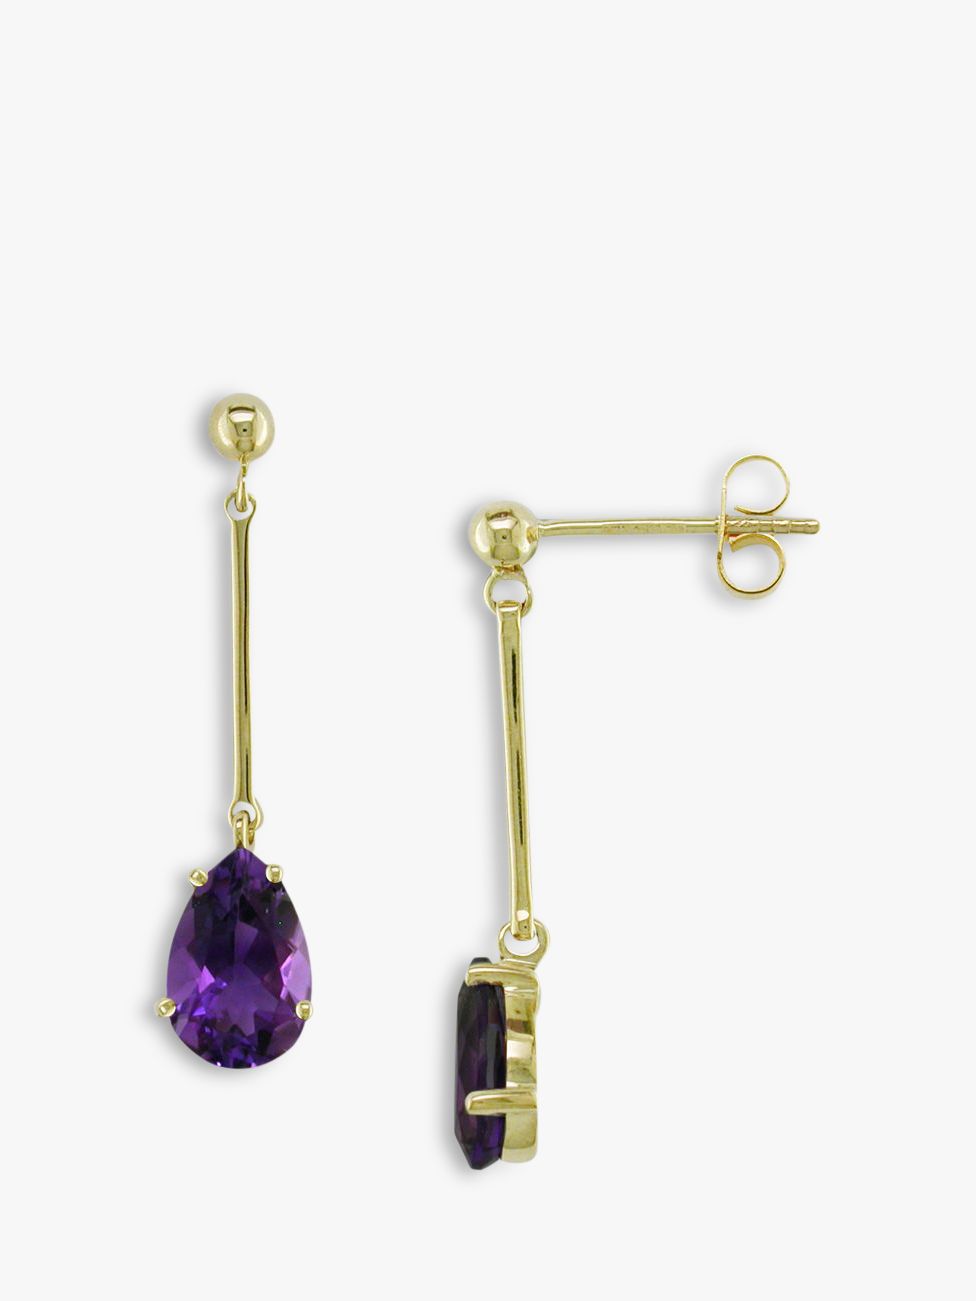 9ct Gold and Amethyst Earrings